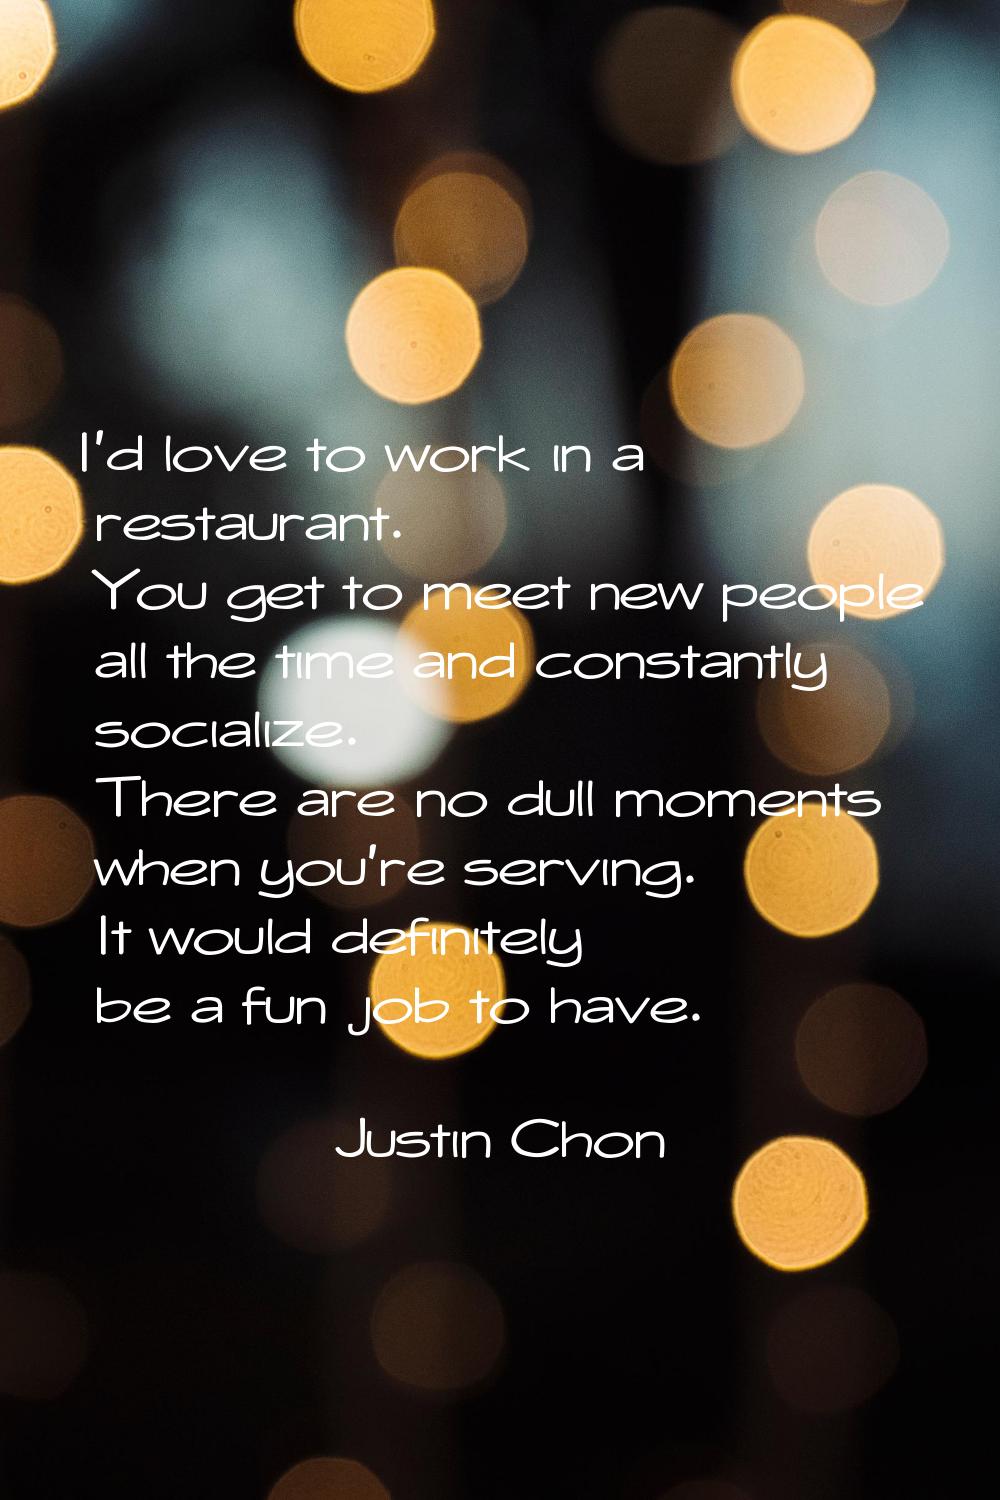 I'd love to work in a restaurant. You get to meet new people all the time and constantly socialize.